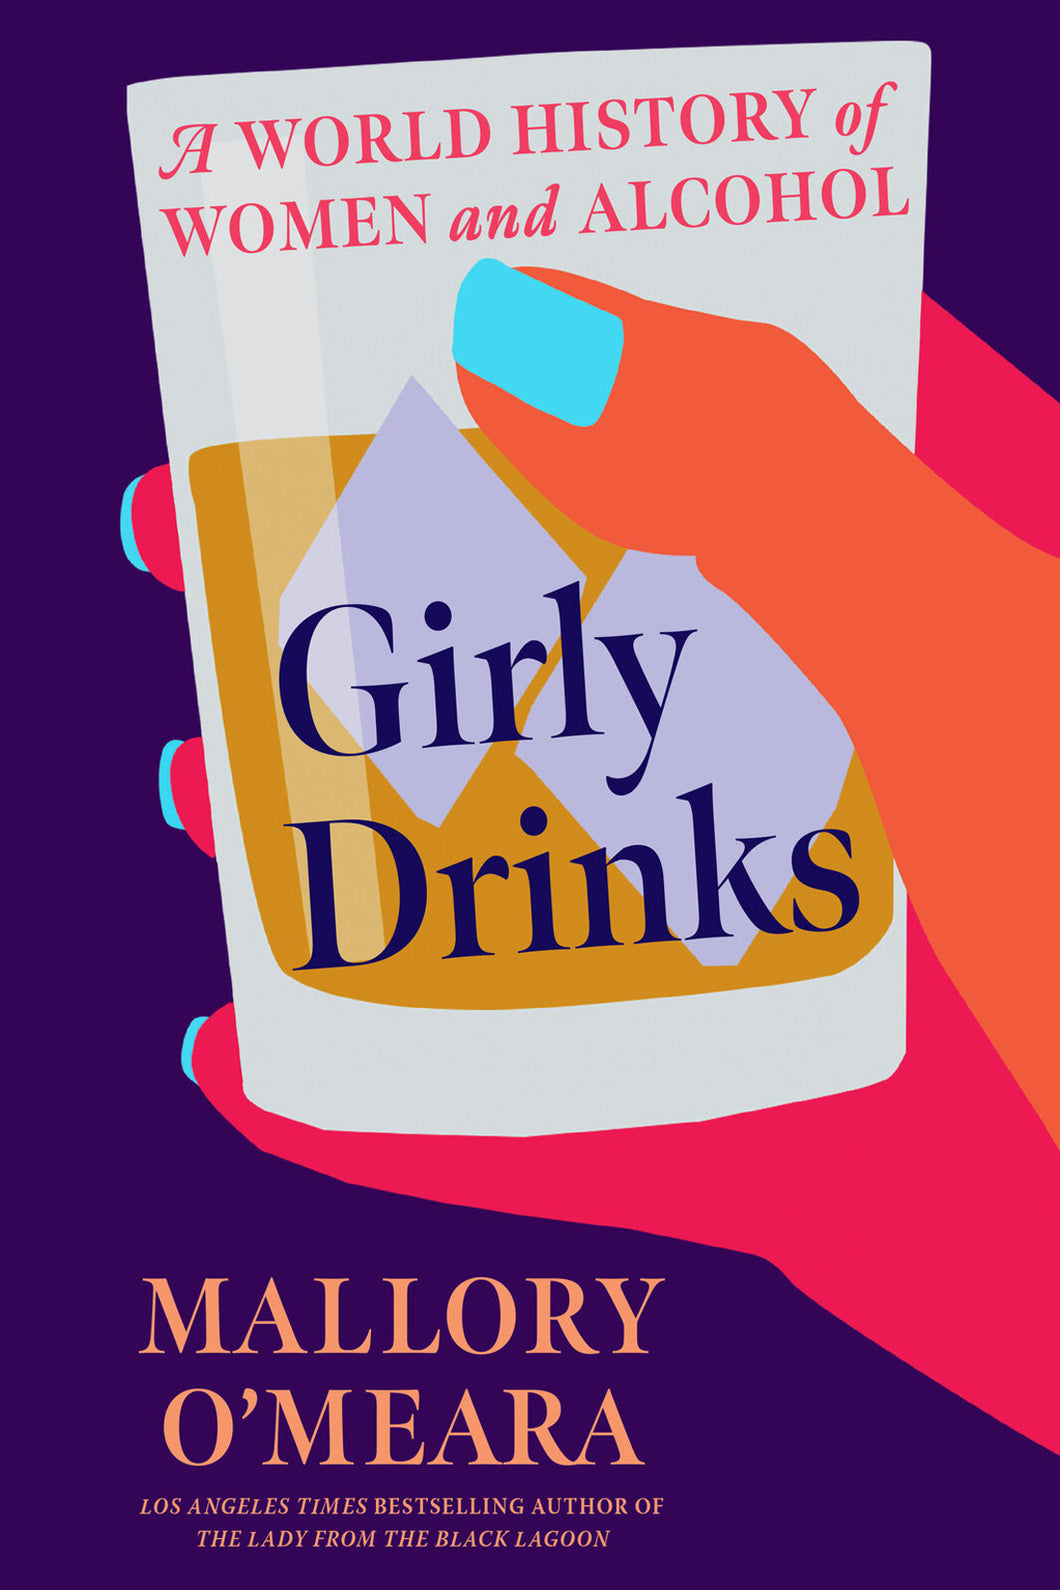 Girly Drinks: A World History of Women and Alcohol by Mallory O'Meara / BOOK OR BUNDLE - Starting at $28!